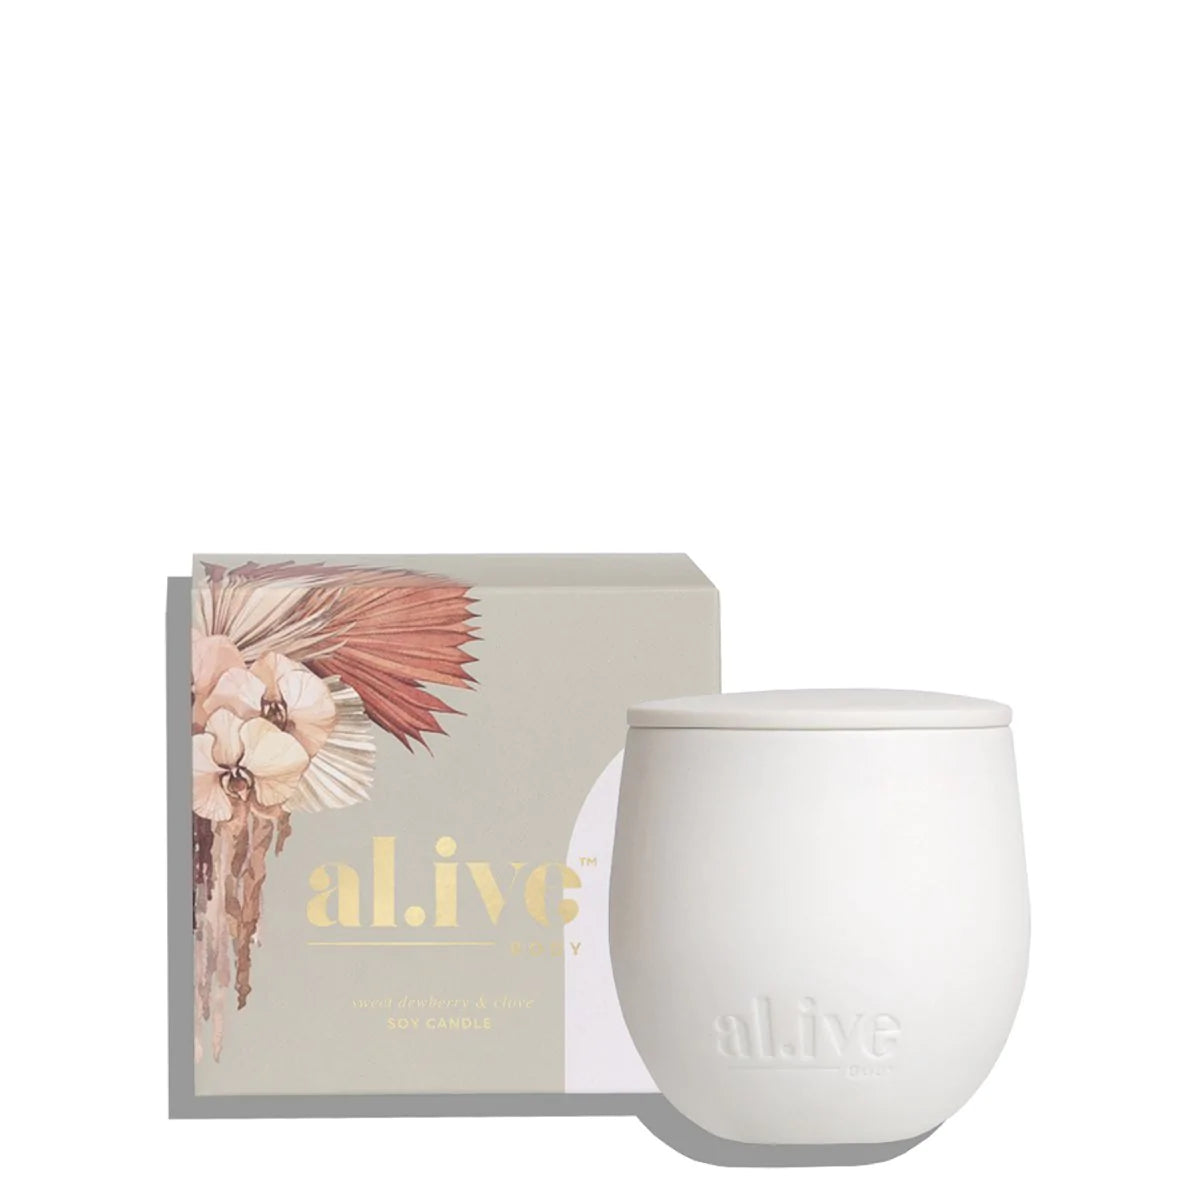 Alive Body Soy Candle - Sweet Dewberry & Clove 295g